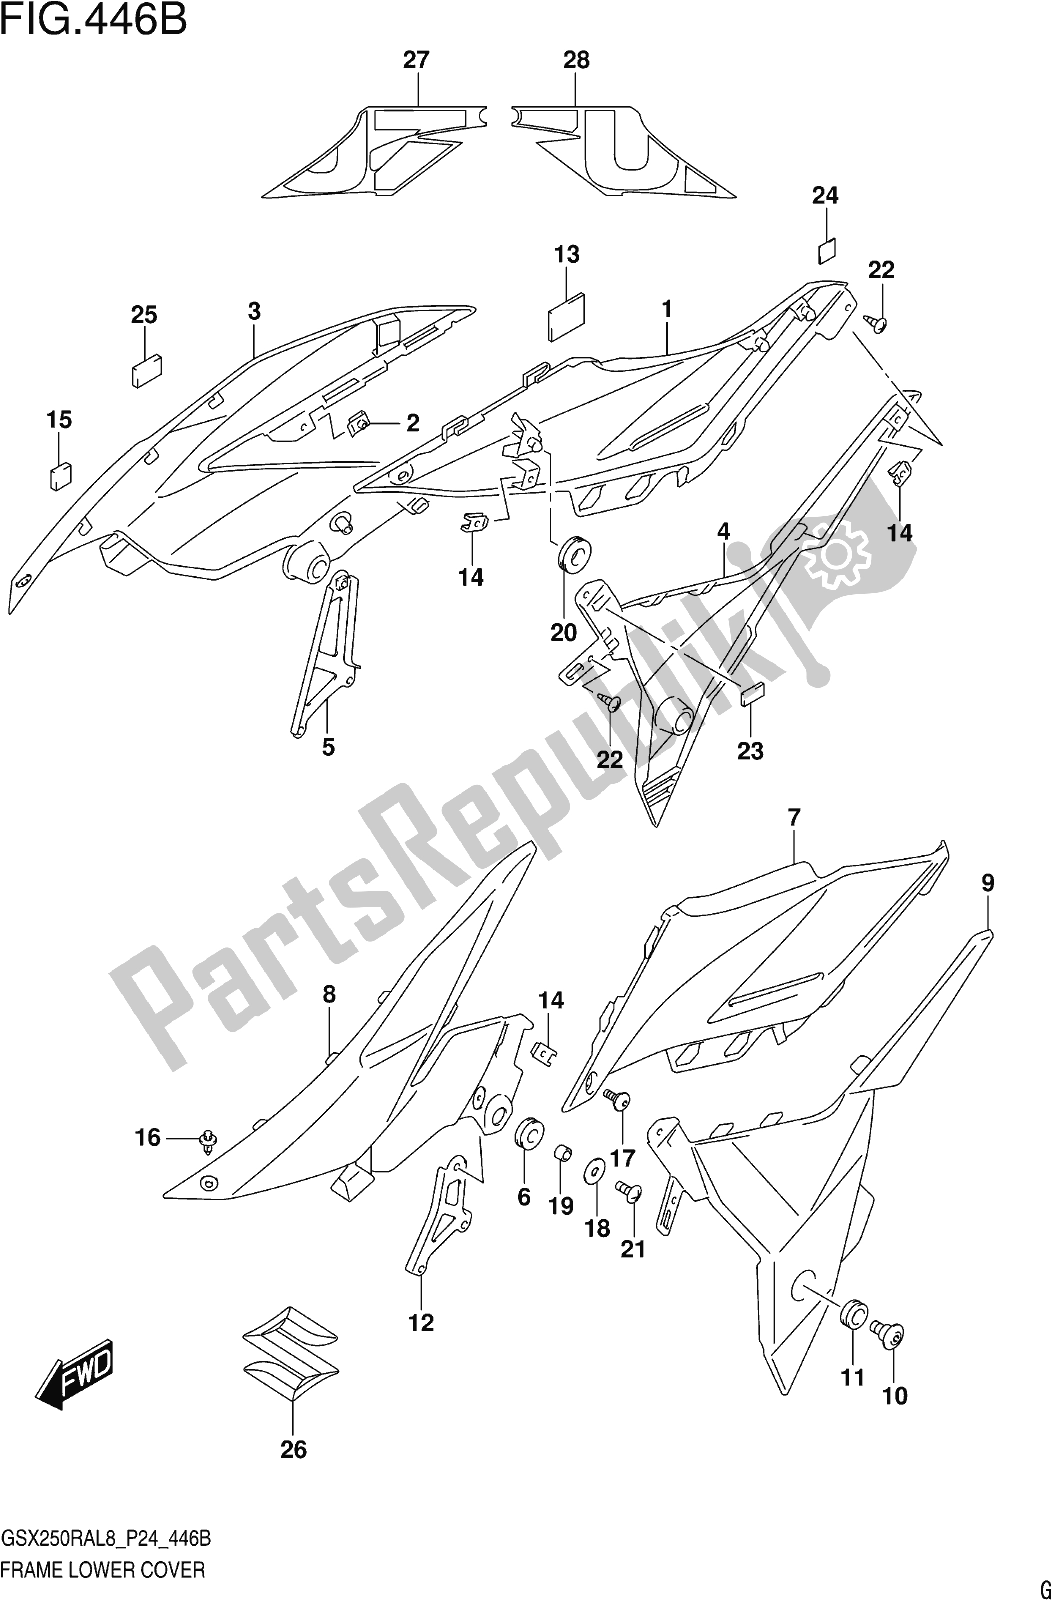 All parts for the Fig. 446b Frame Lower Cover (gw250razl8 P24) of the Suzuki GW 250 RAZ 2018